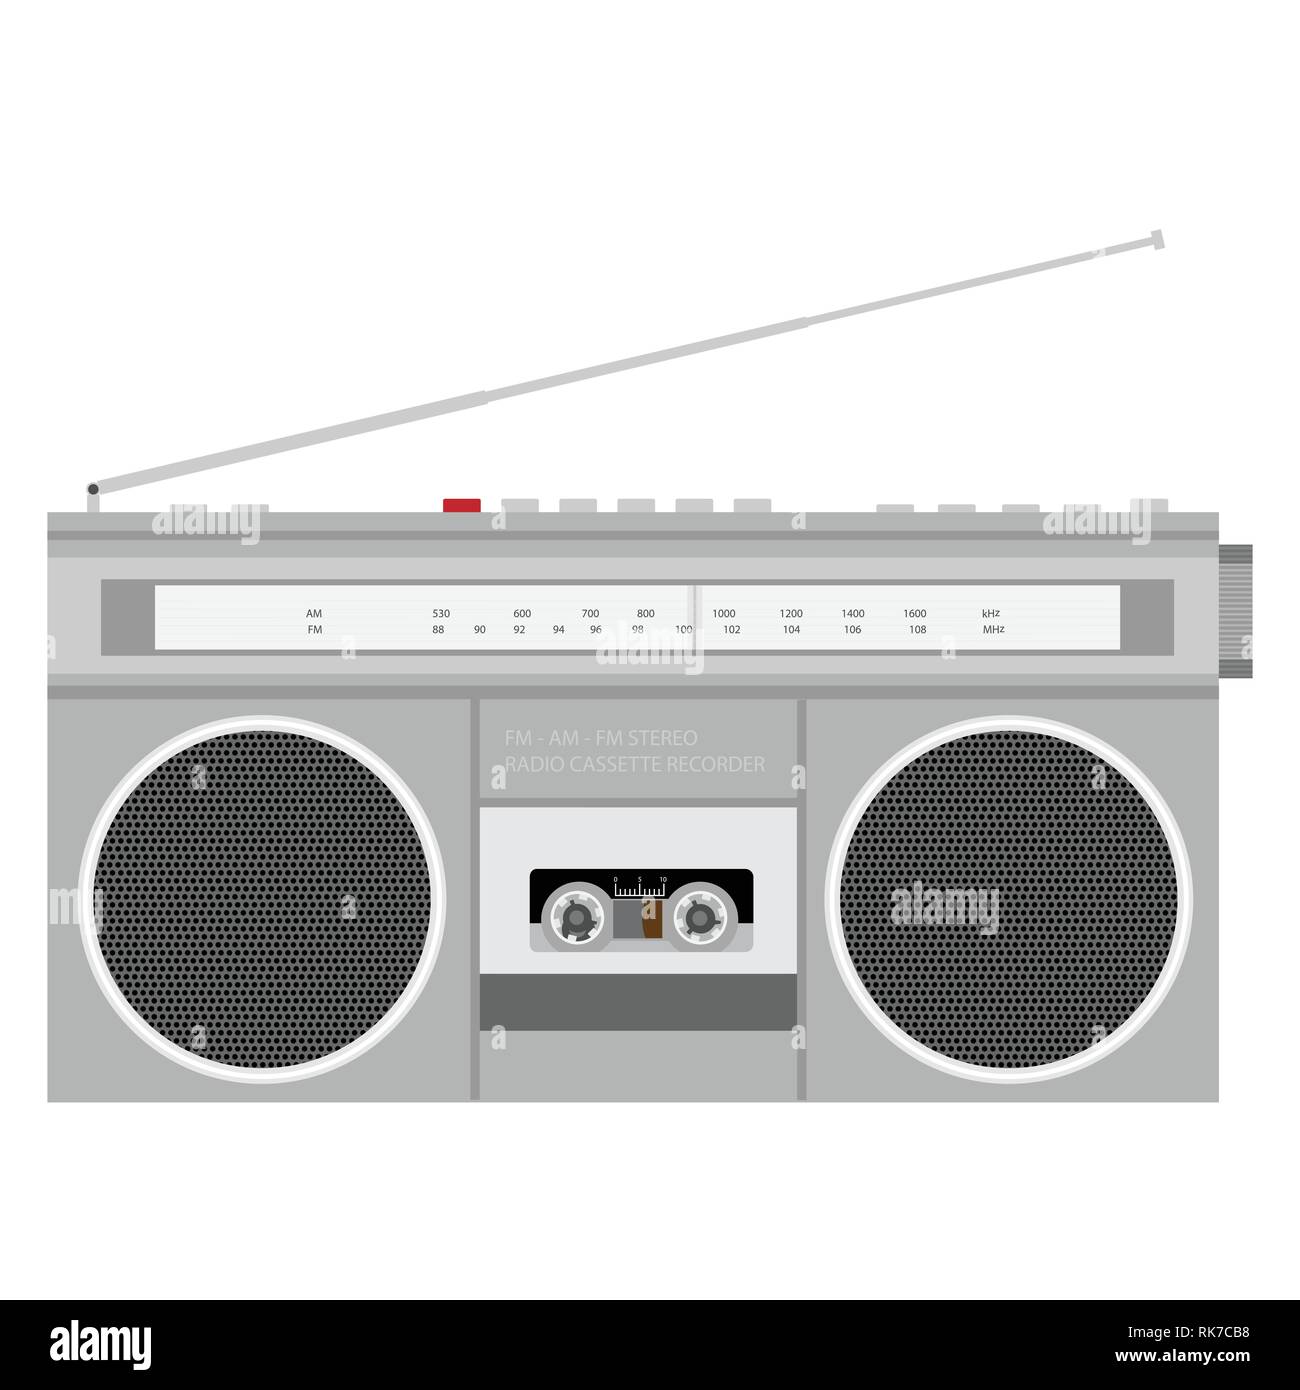 Retro outdated portable stereo boombox radio cassette recorder from 80s . Stock Vector